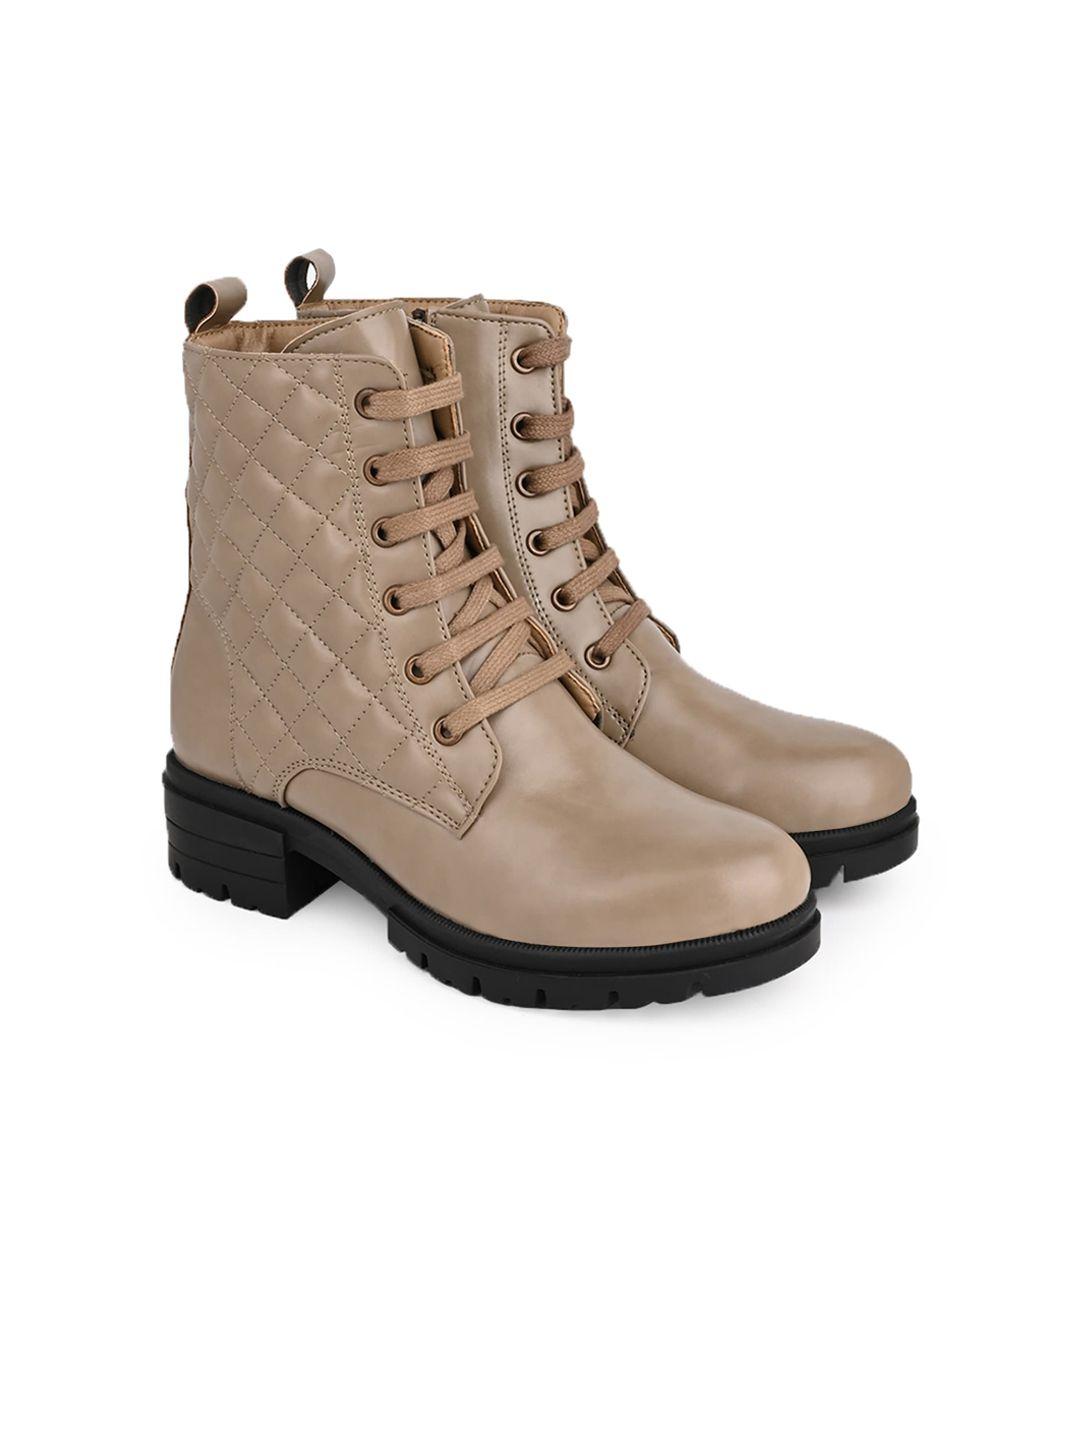 hydes n hues women quilted heeled mid-top leather regular boots